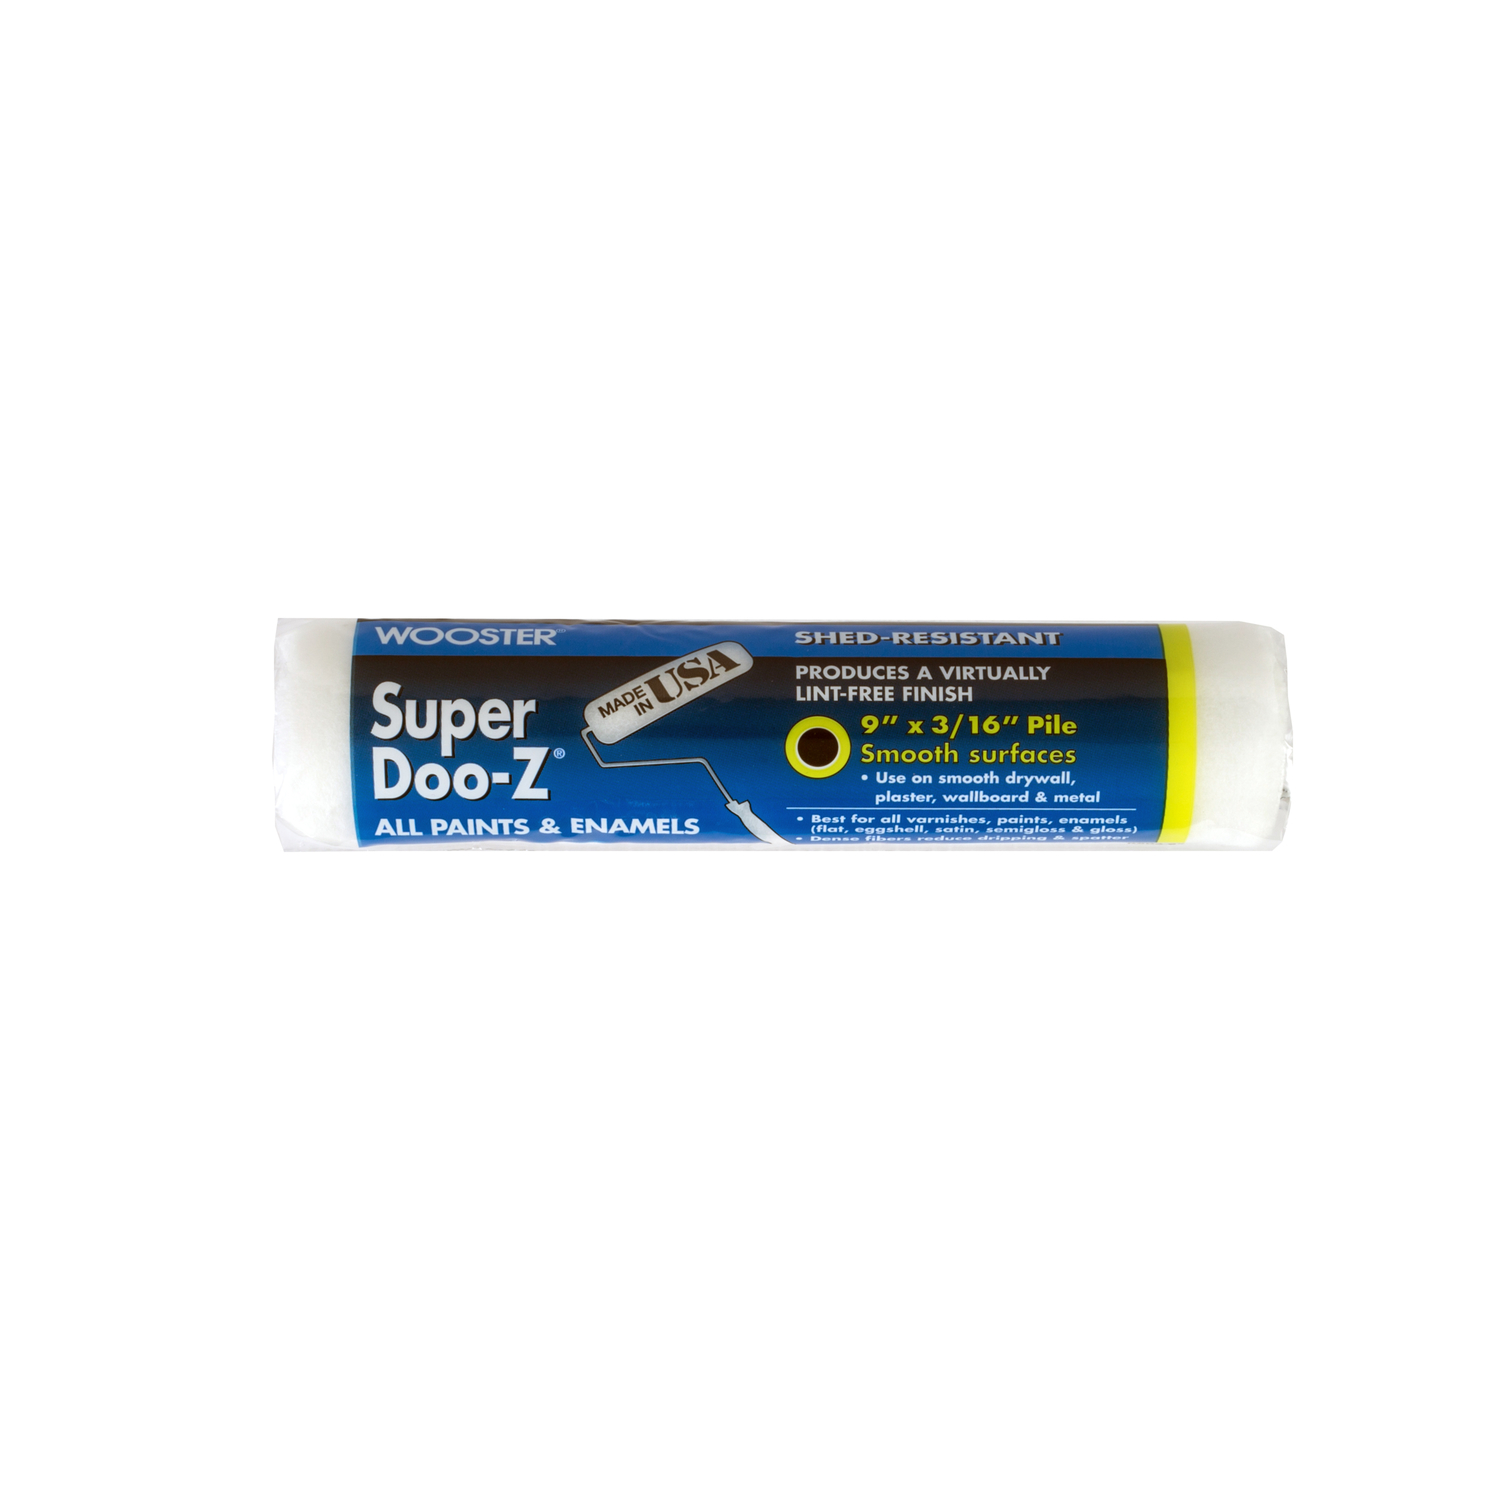 Wooster Super Doo-Z Fabric 9 in. W X 3/16 in. Regular Paint Roller Cover 1 pk